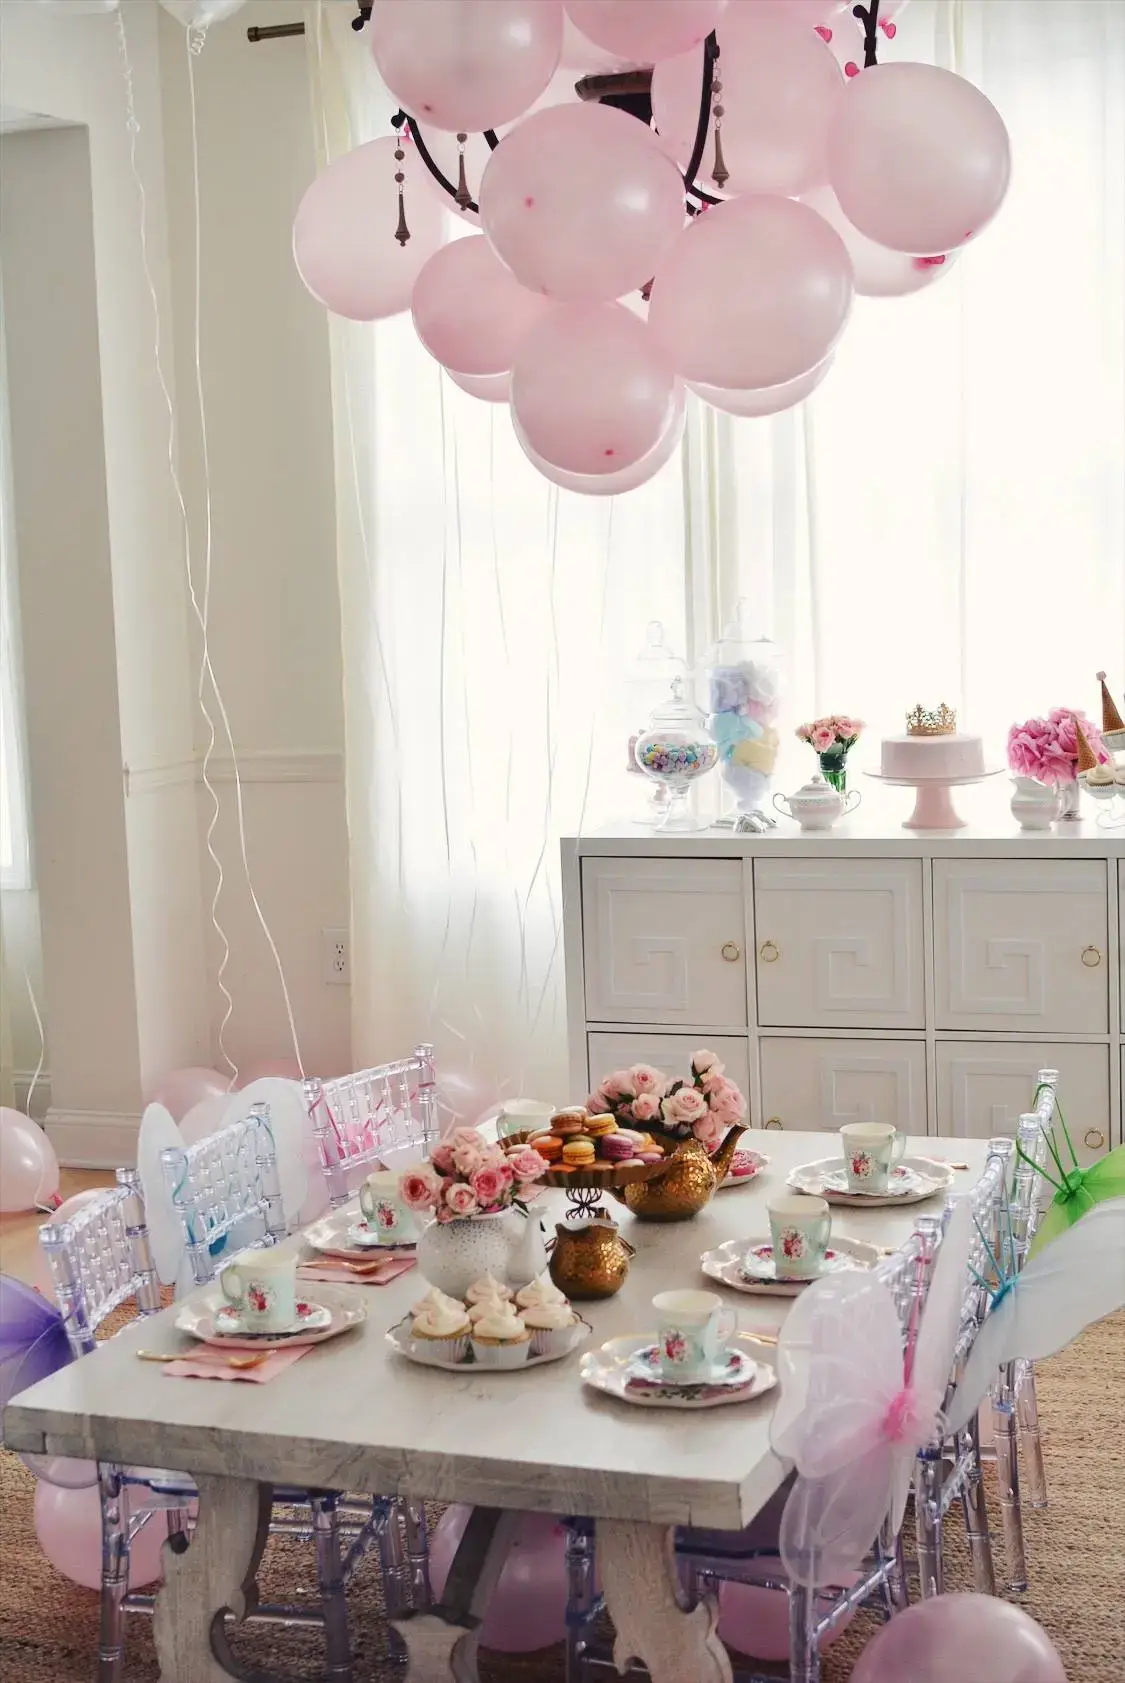 4 Year Old Birthday Party Ideas